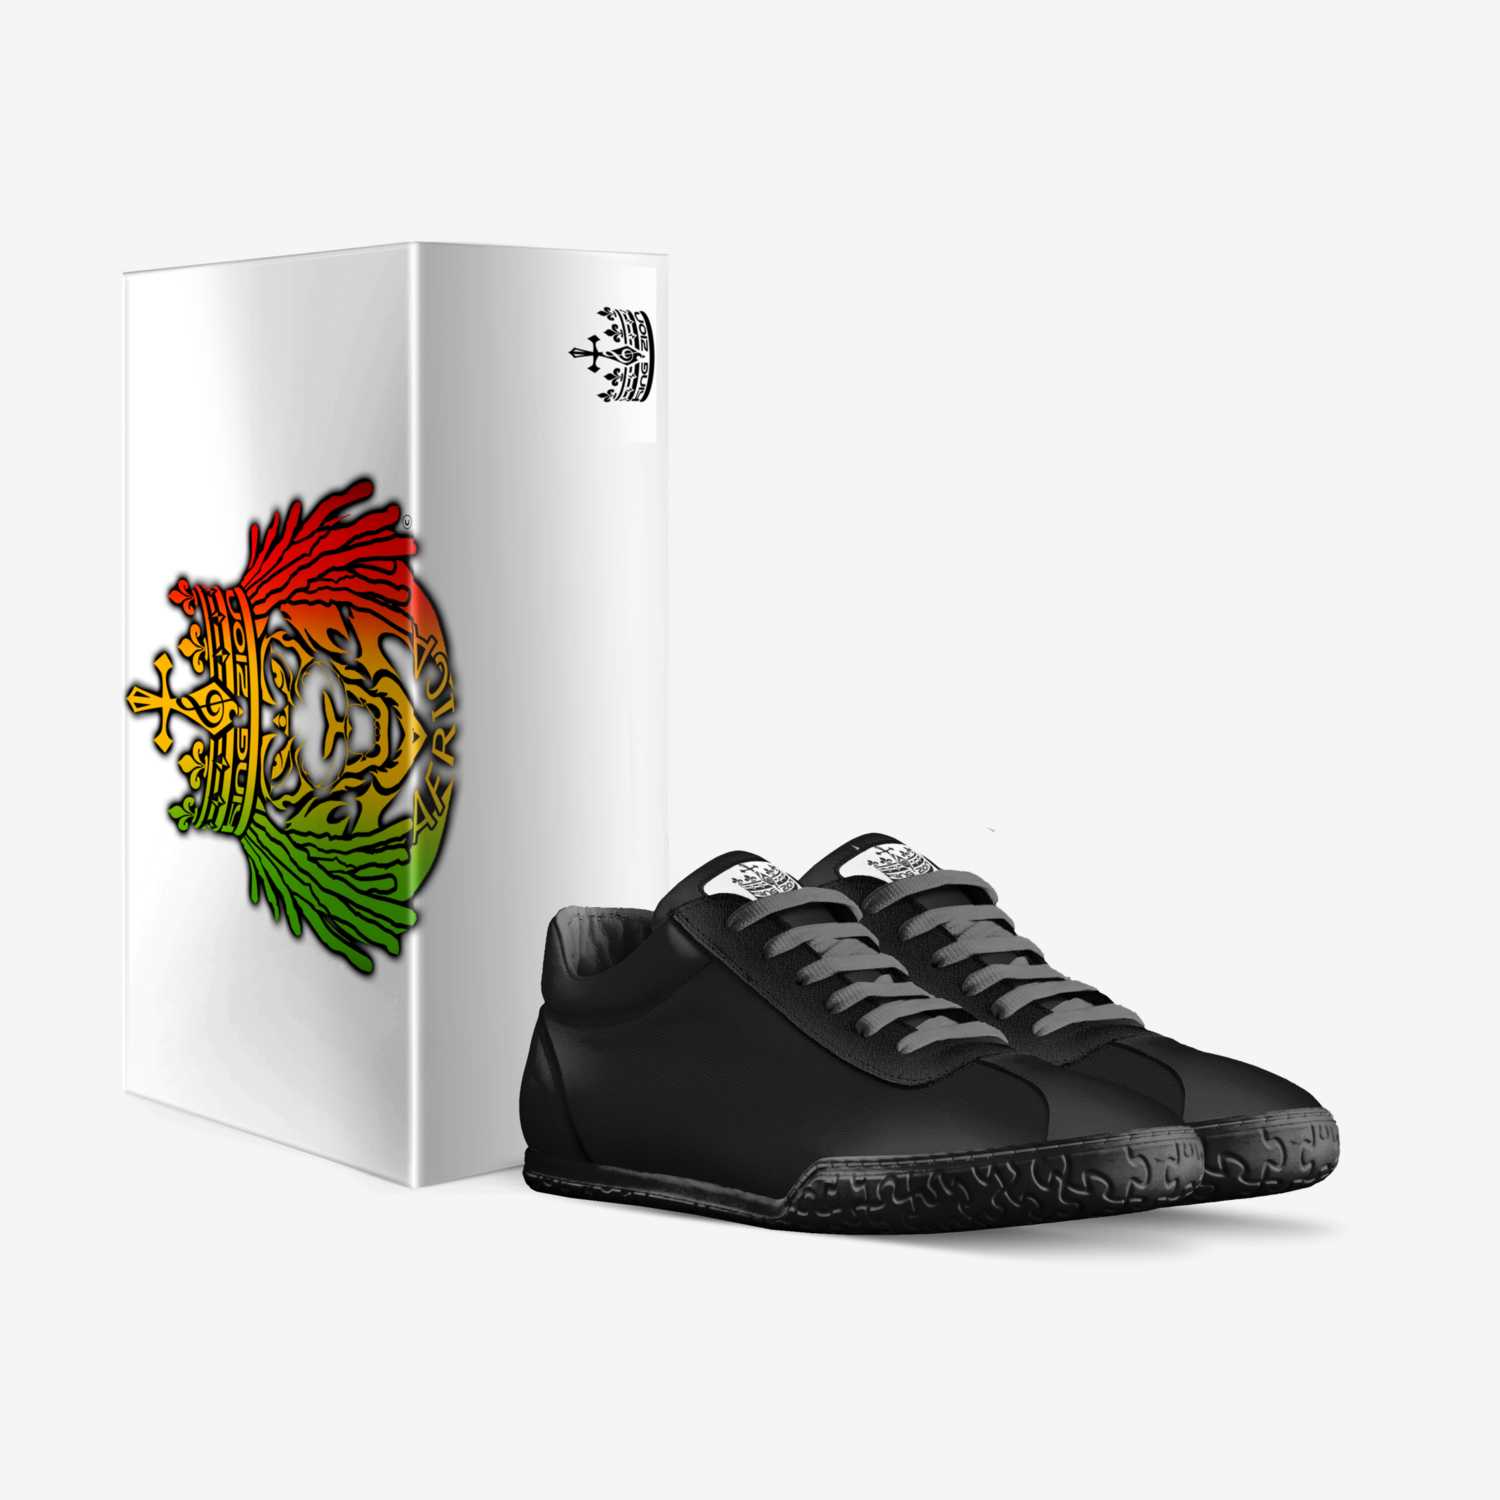 The Redeemer custom made in Italy shoes by King Zion | Box view